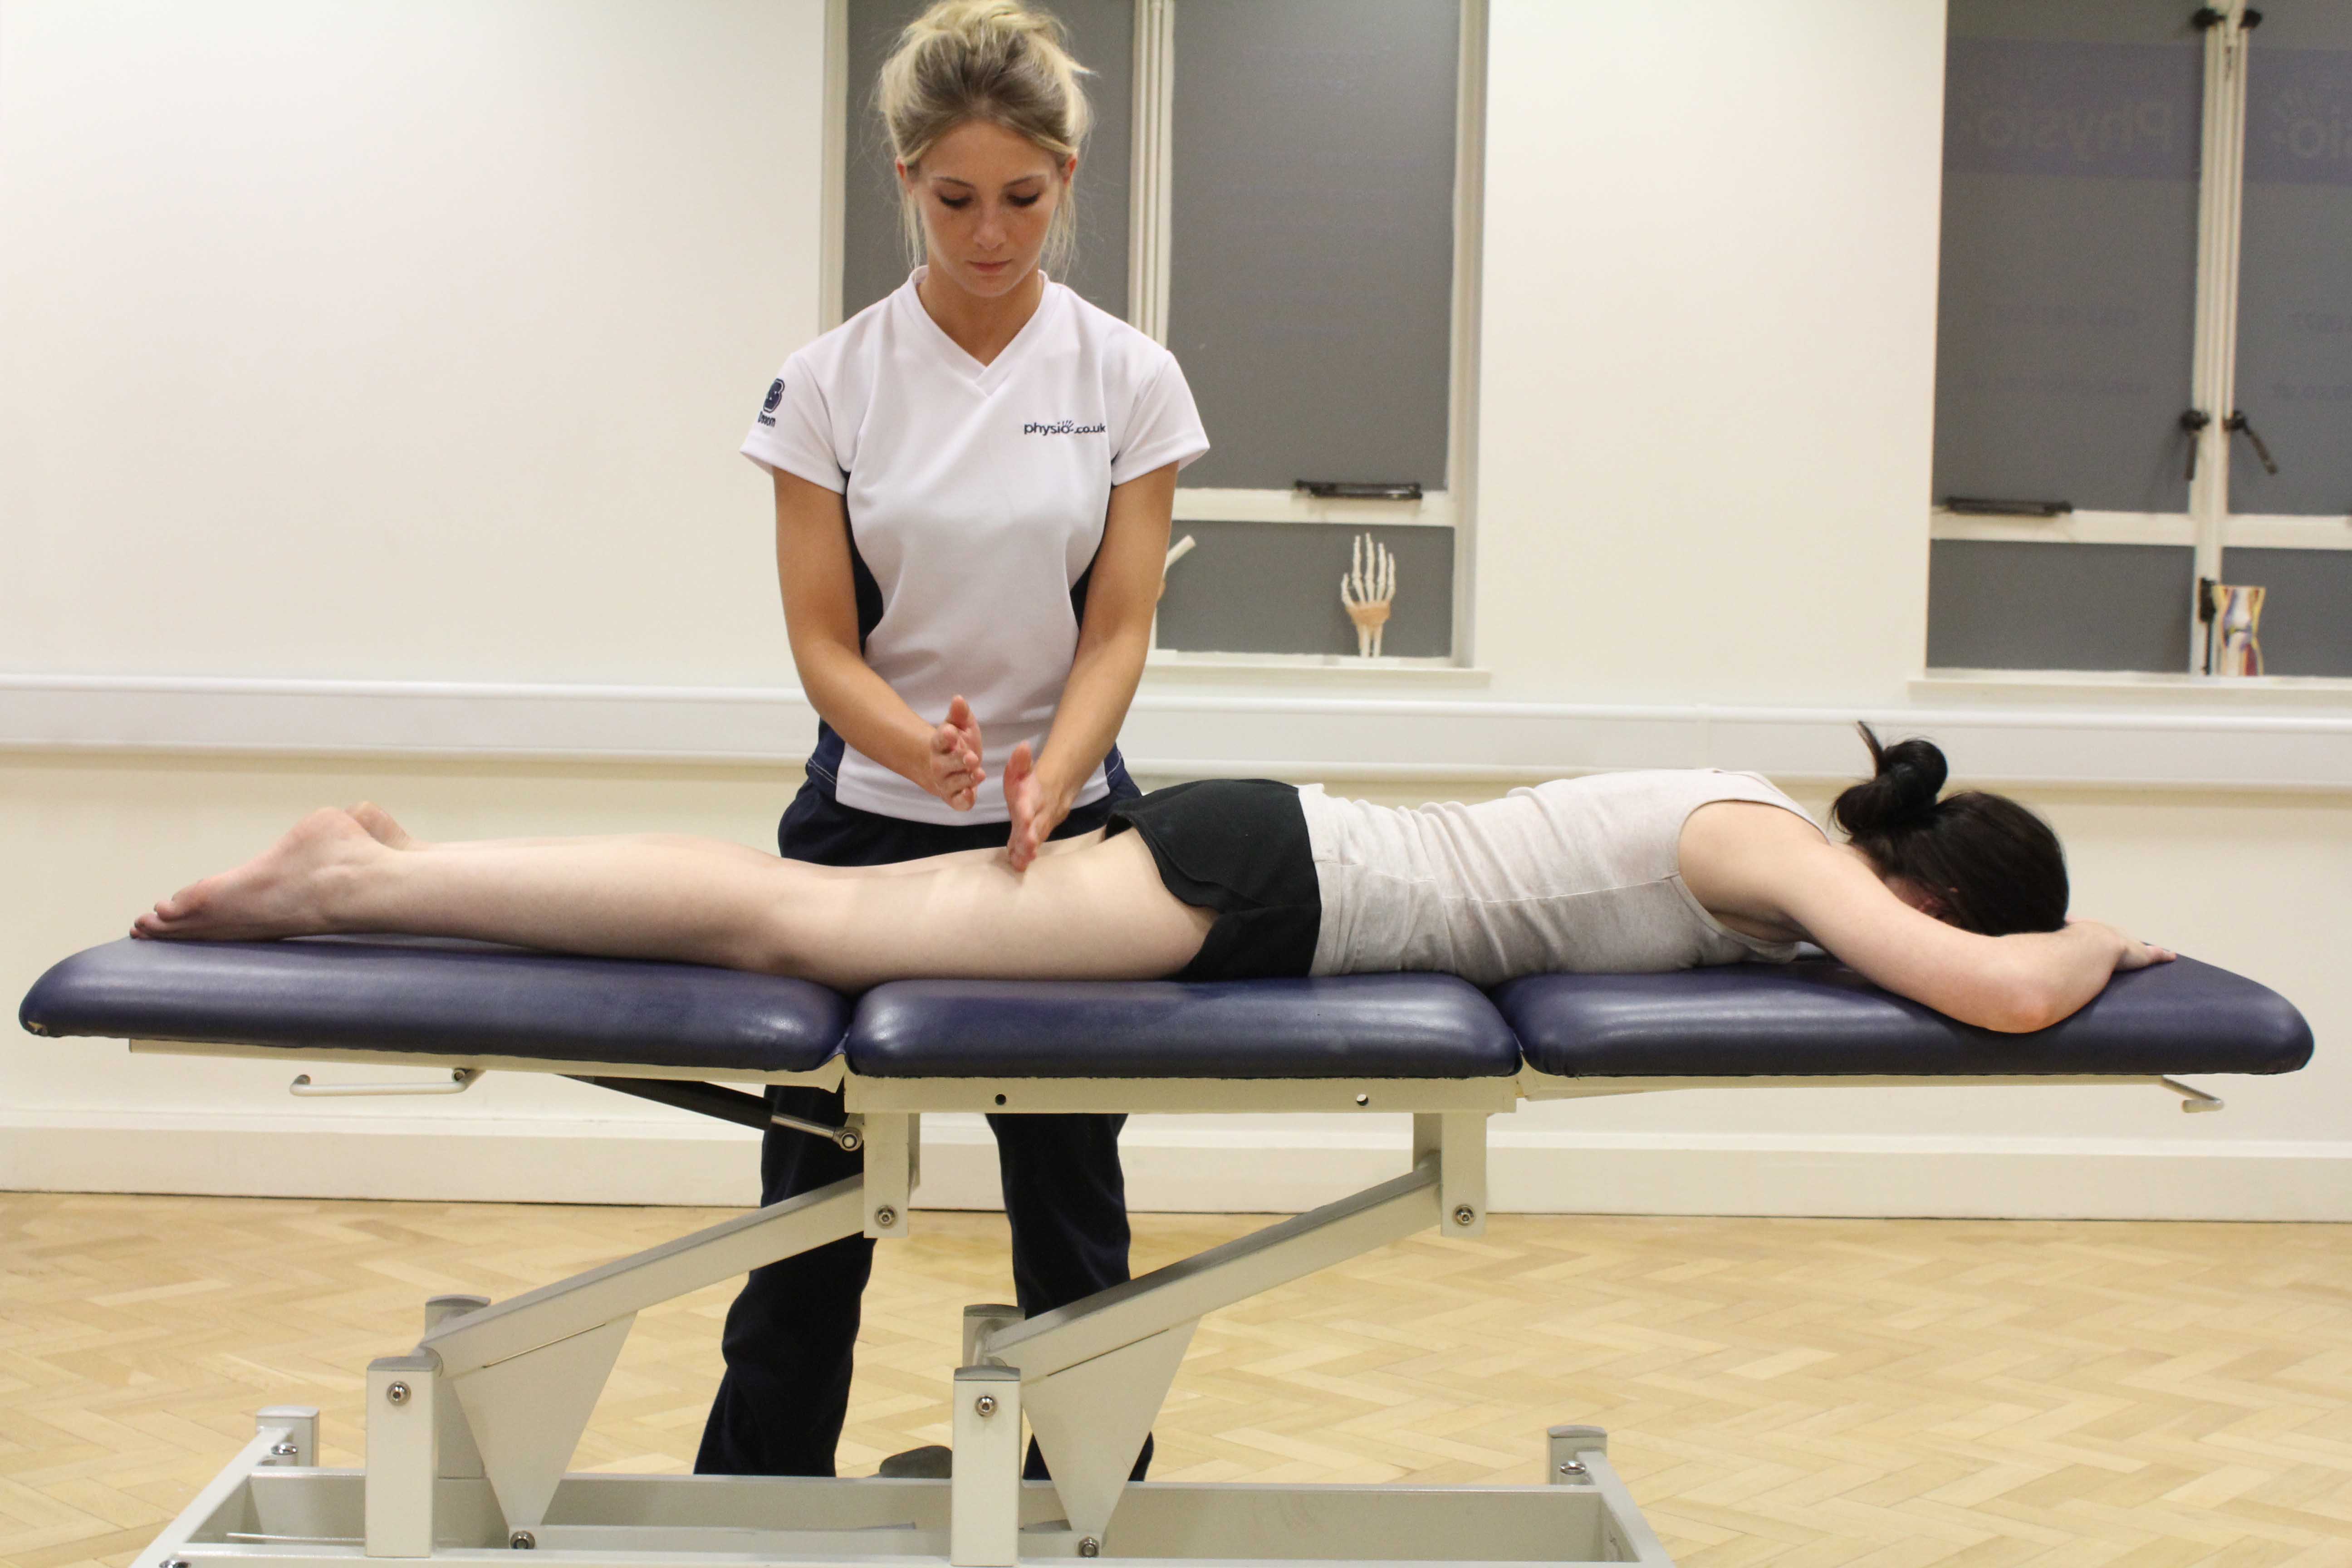 Hacking percussion massage technique applied to hamstring muscles by a specialist massage therapist